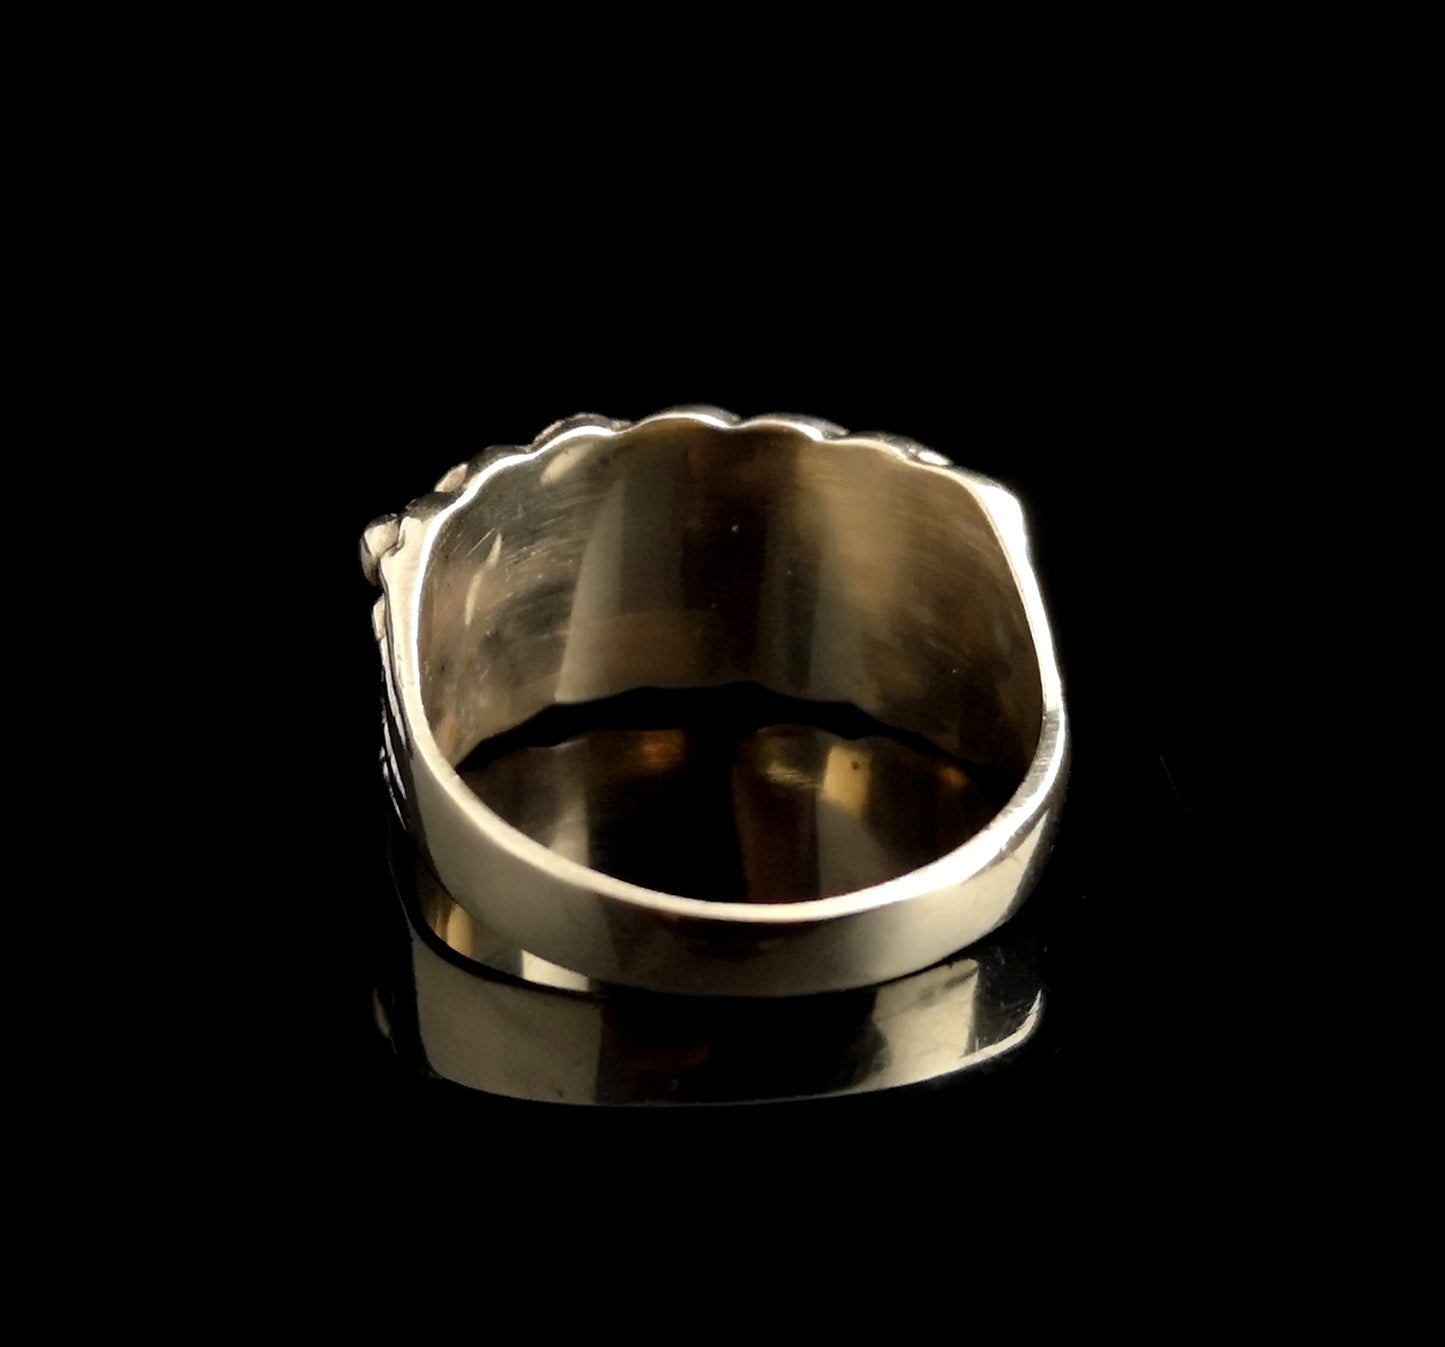 Vintage gents 9ct gold keeper ring, heavy